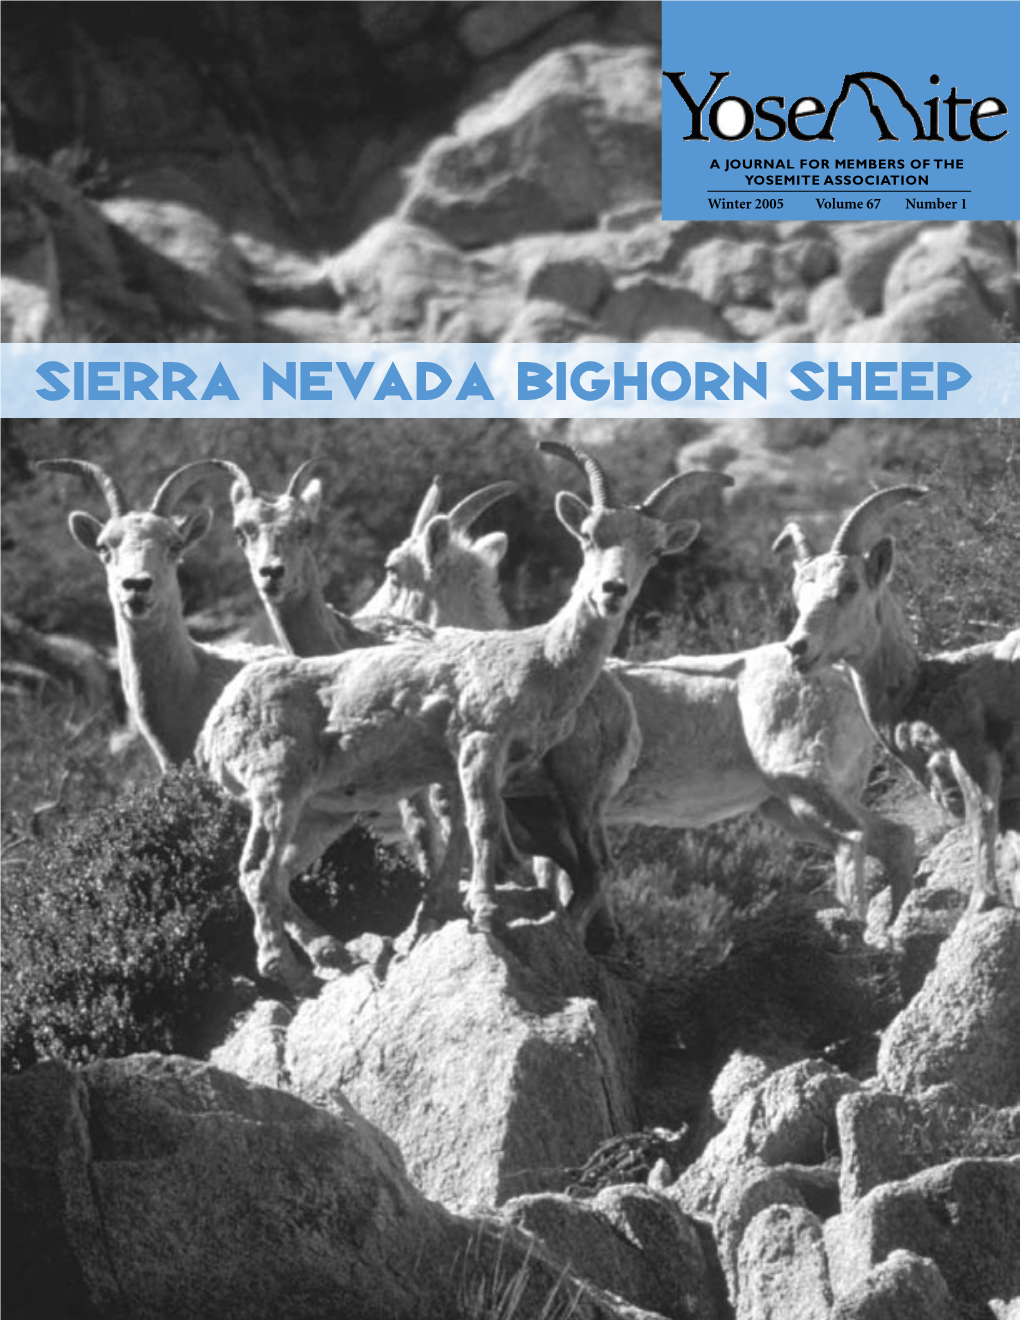 Sierra Nevada Bighorn Sheep a Message from the President